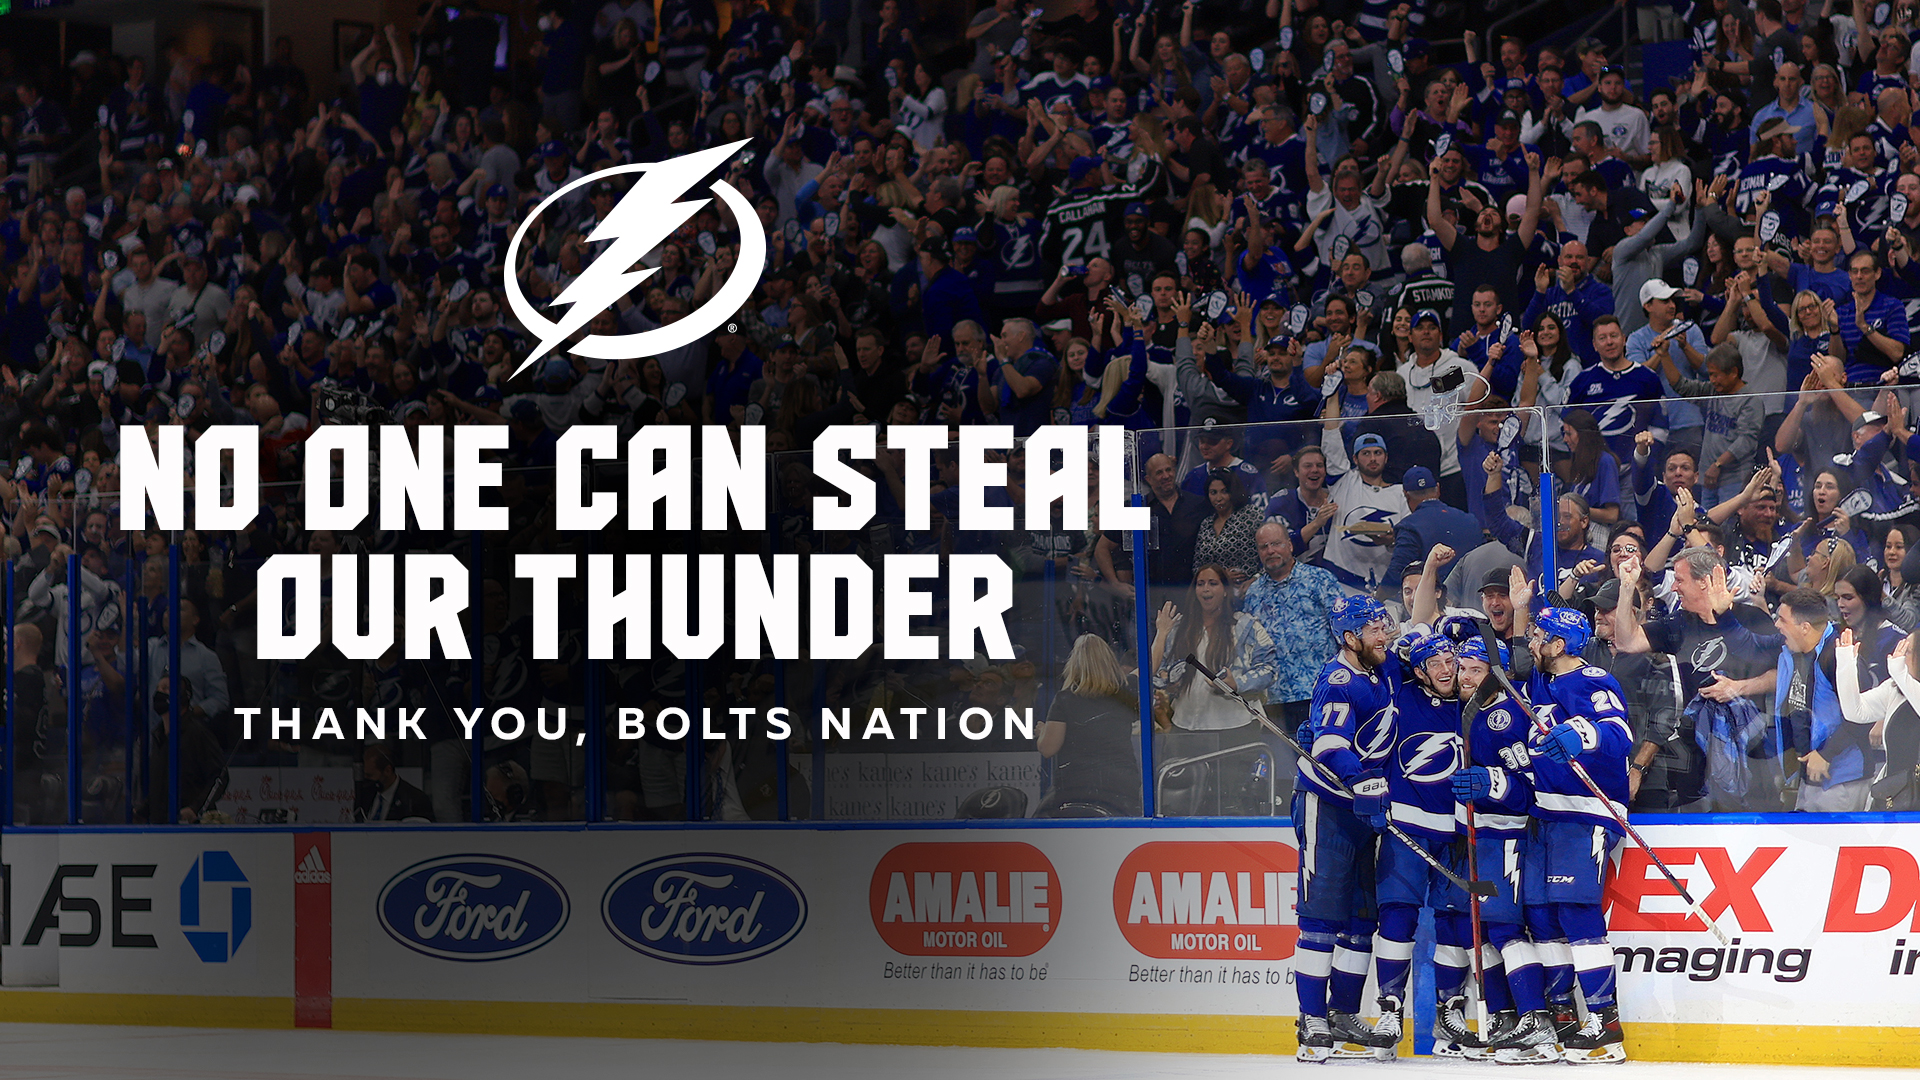 Tampa Bay Lightning: Bolts Nation Is More Than A Fan Base, It's A